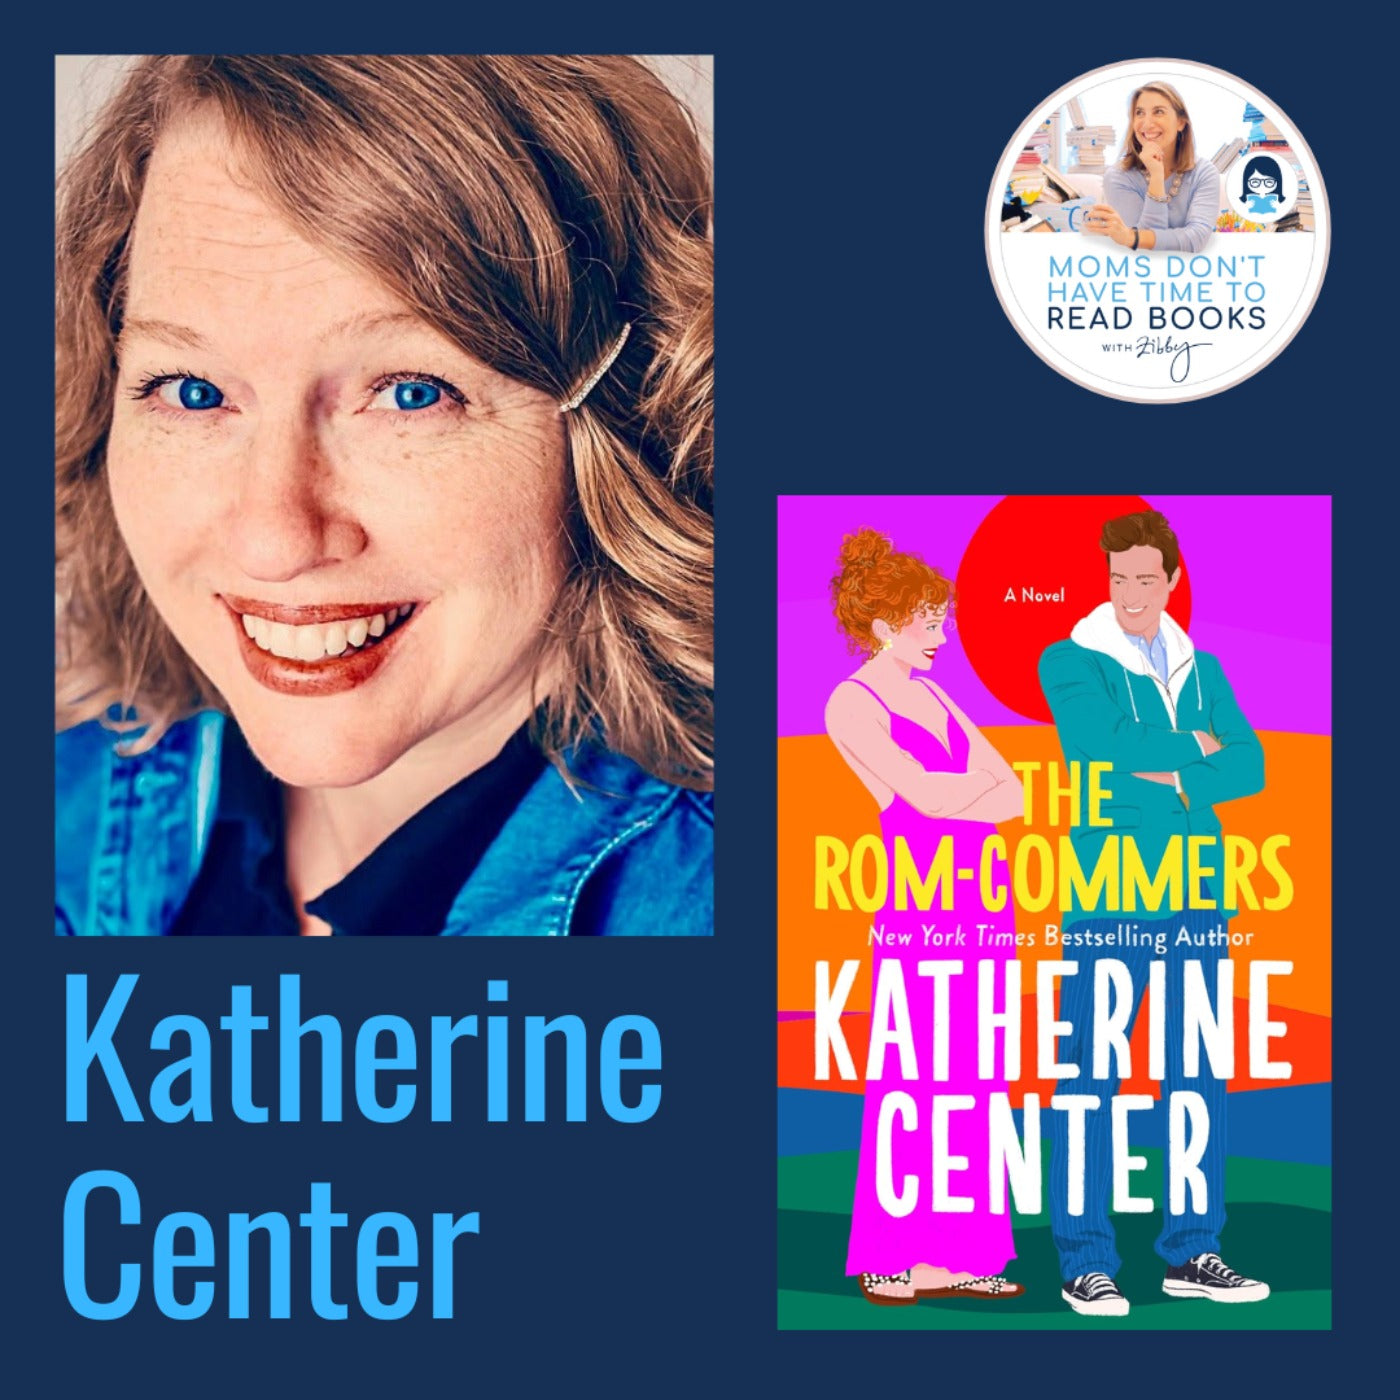 Katherine Center, THE ROM-COMERS